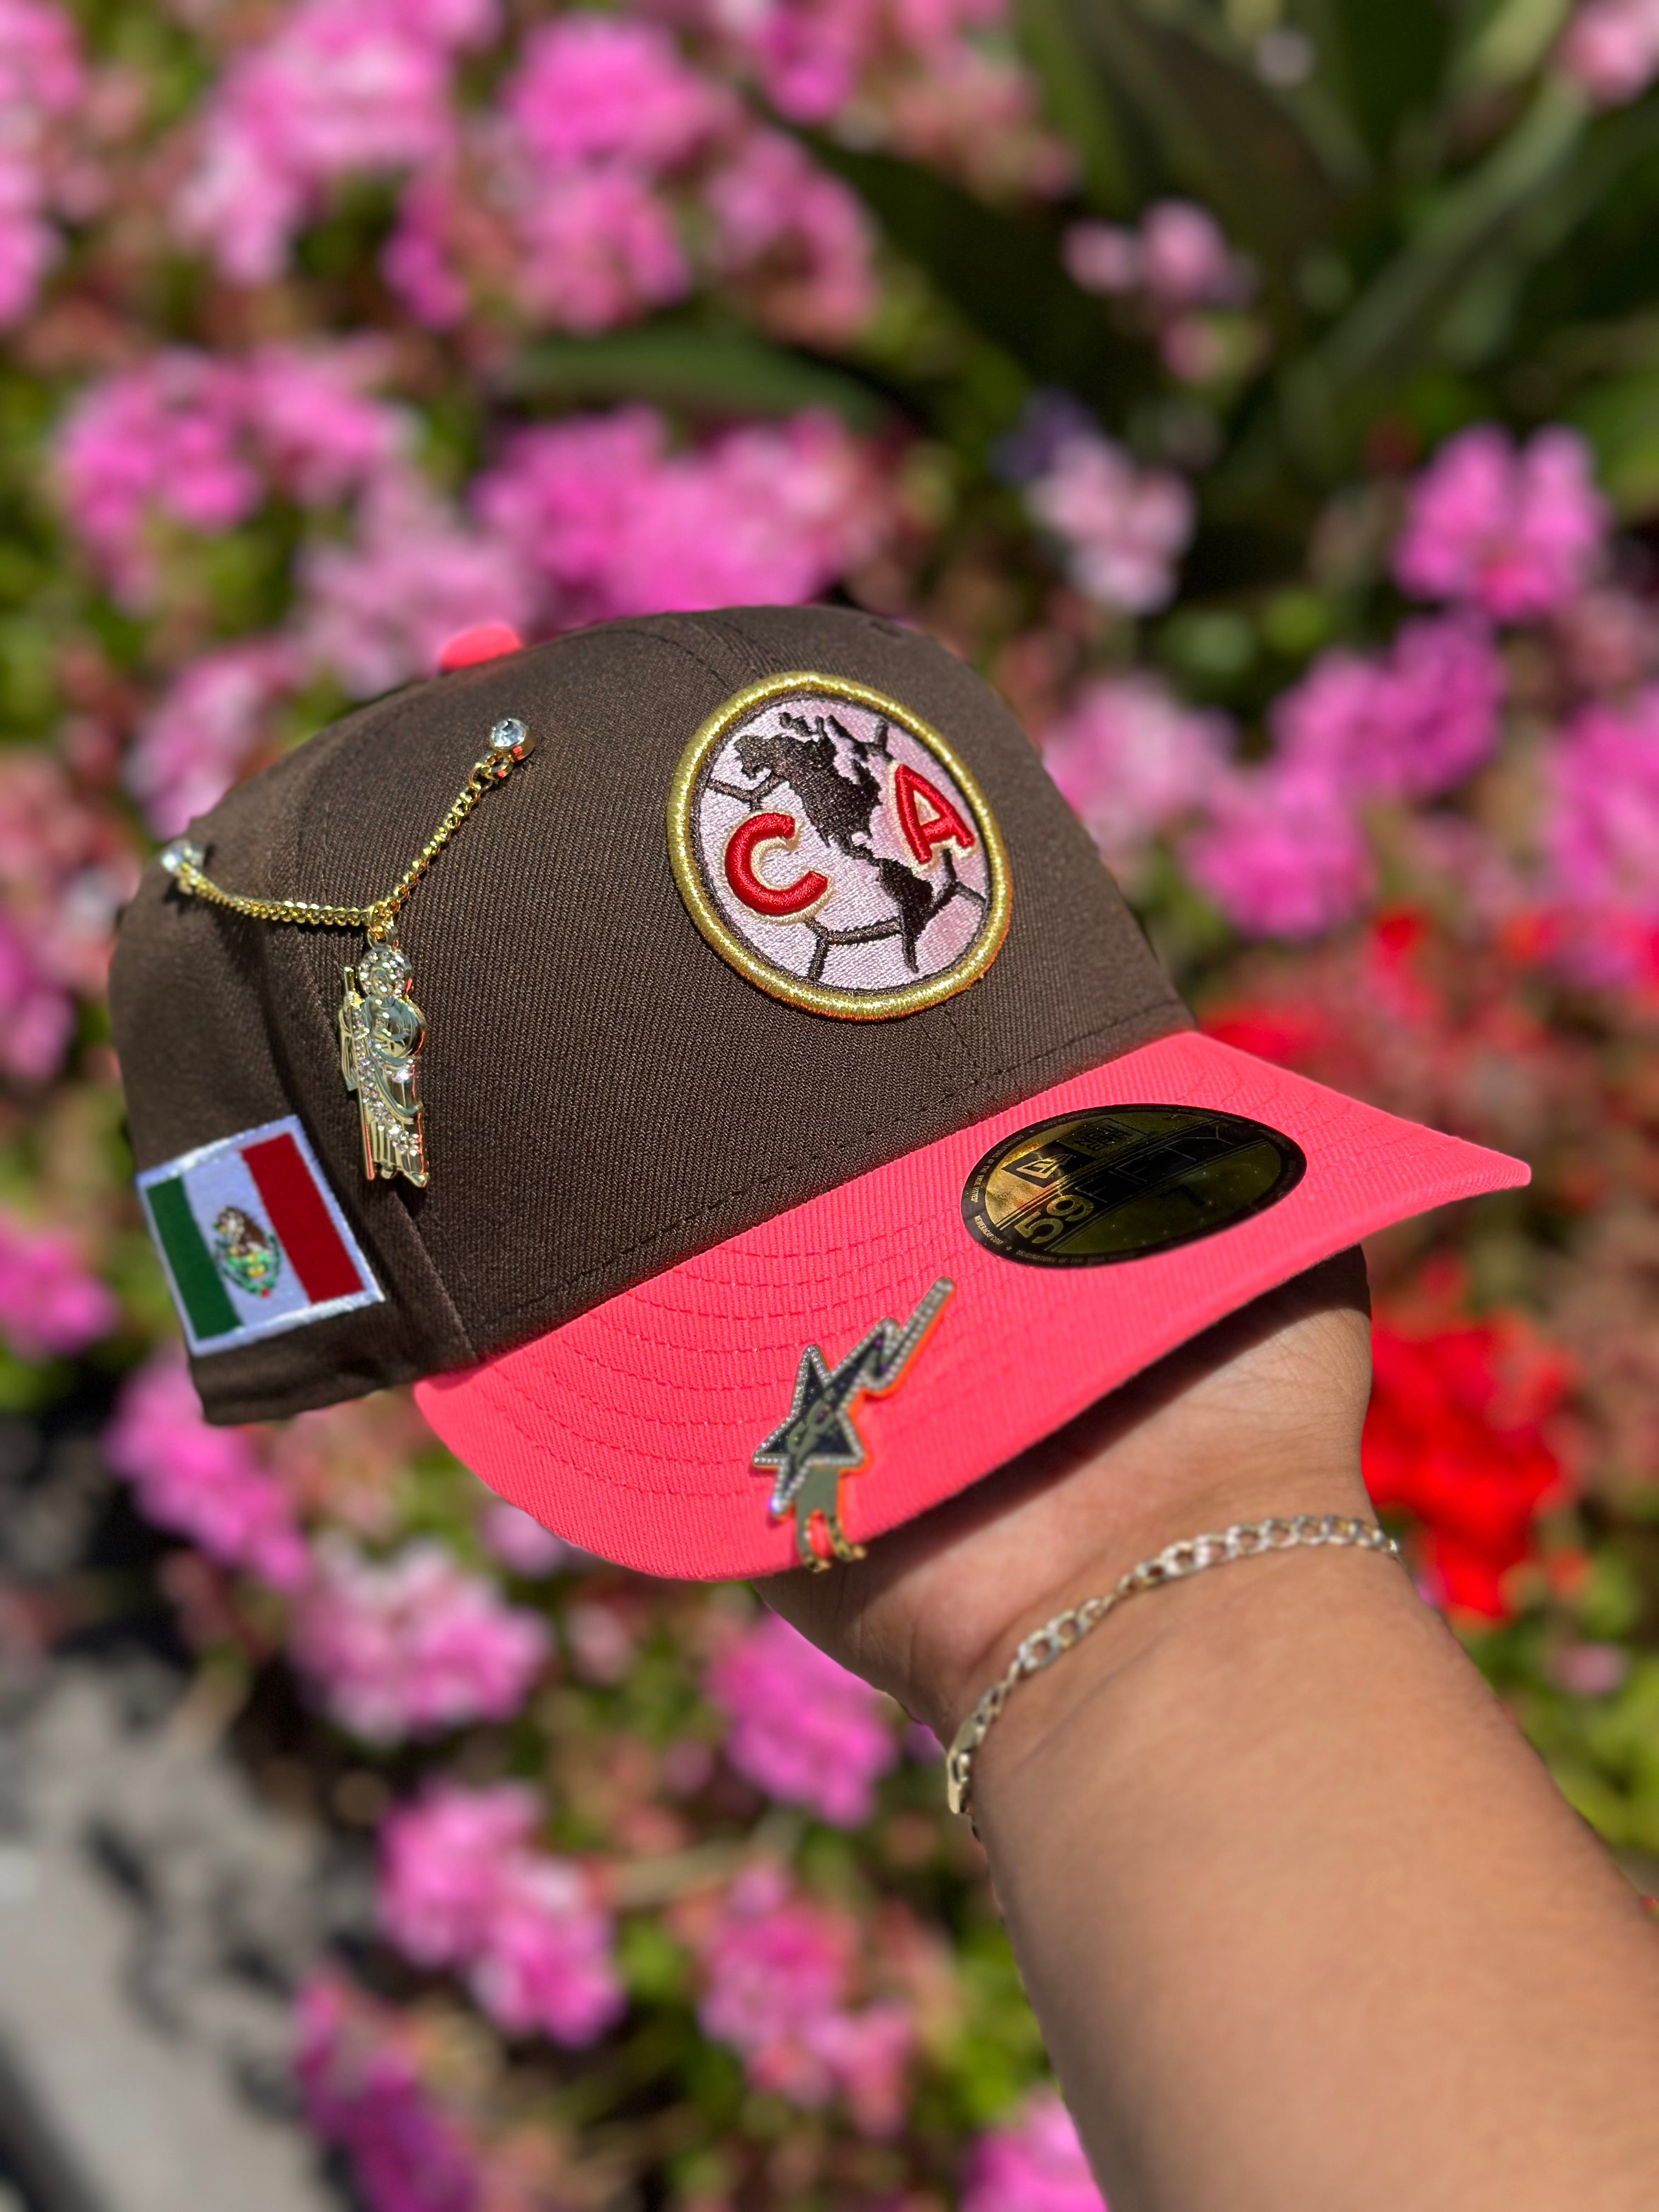 NEW ERA EXCLUSIVE 59FIFTY MOCHA/NEON PINK "CLUB AMERICA" W/ MEXICO FLAG SIDE PATCH